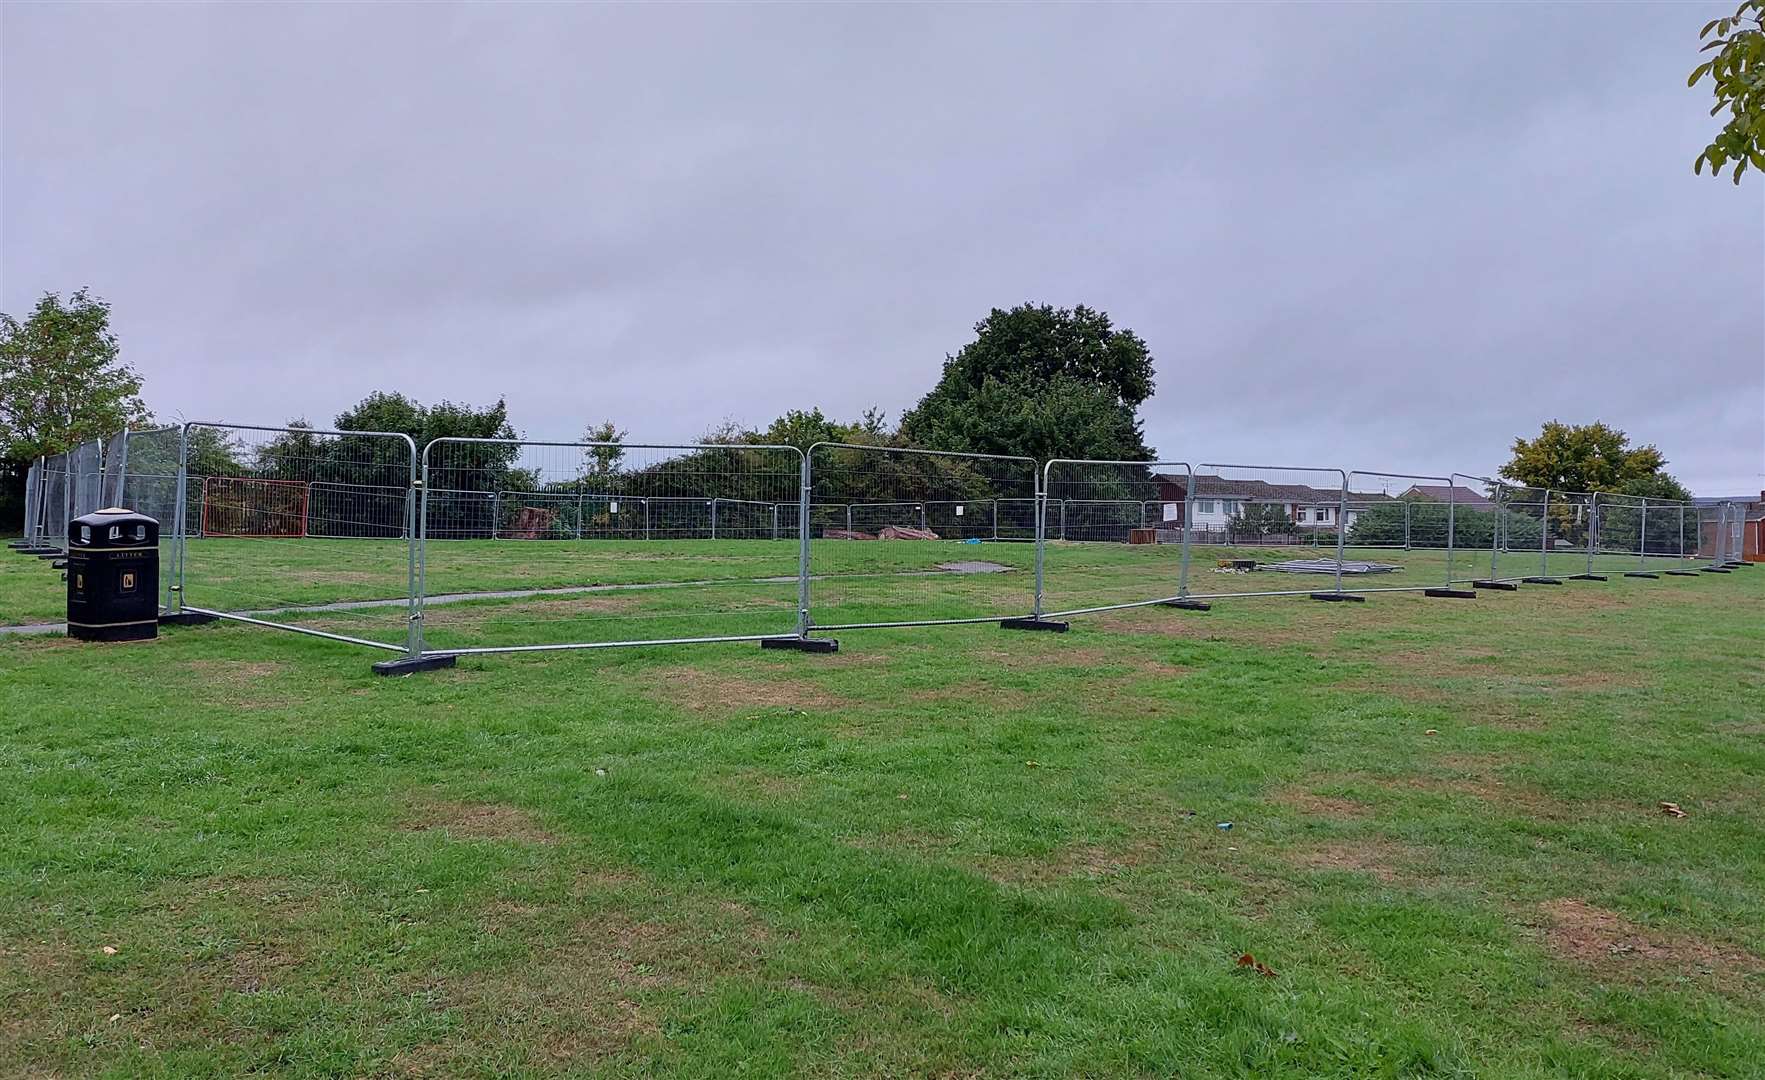 Rylands Road Park was fenced off last week to allow for the works